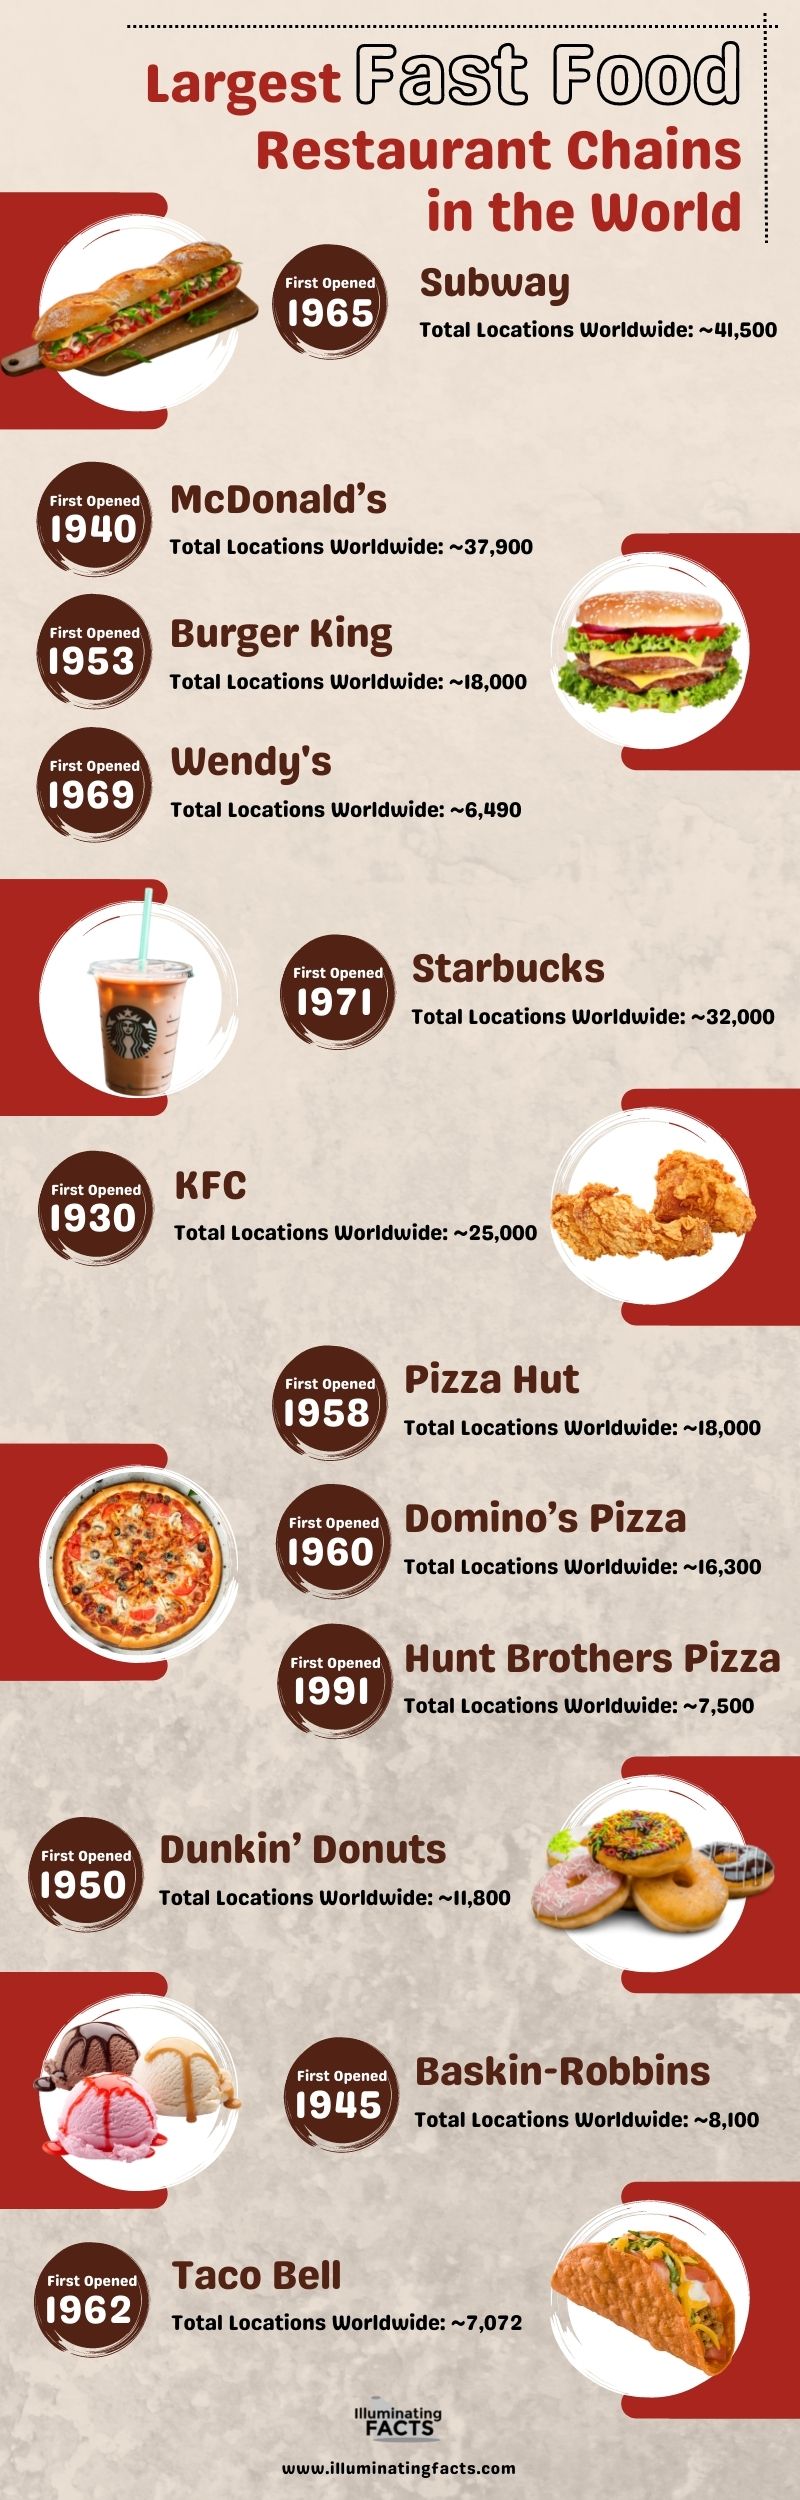 Largest Fast Food Restaurant Chains in the World